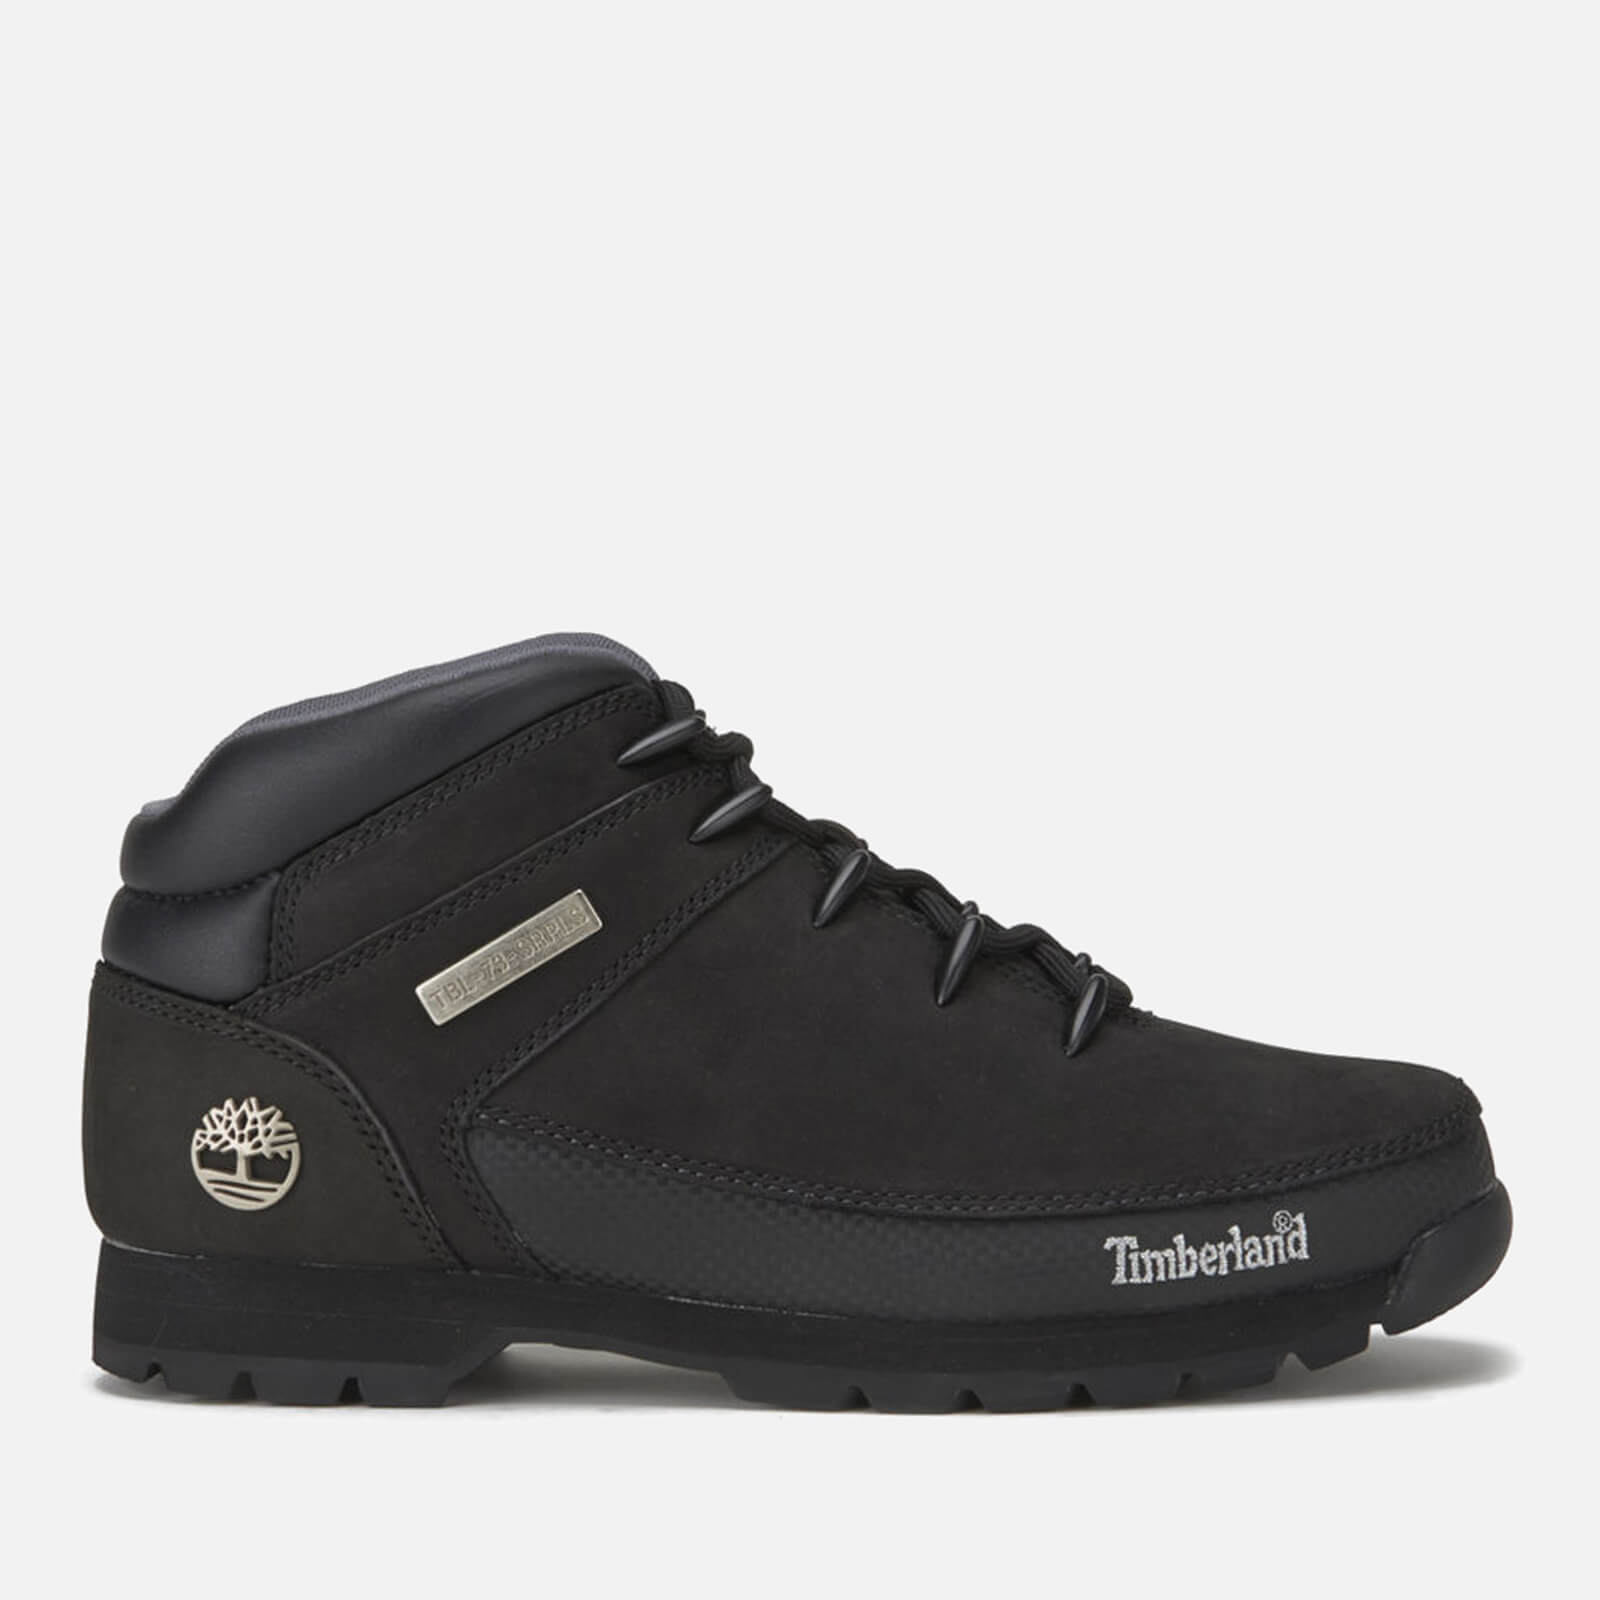 Timberland Men’s Euro Sprint Leather Hiker Boots - Black